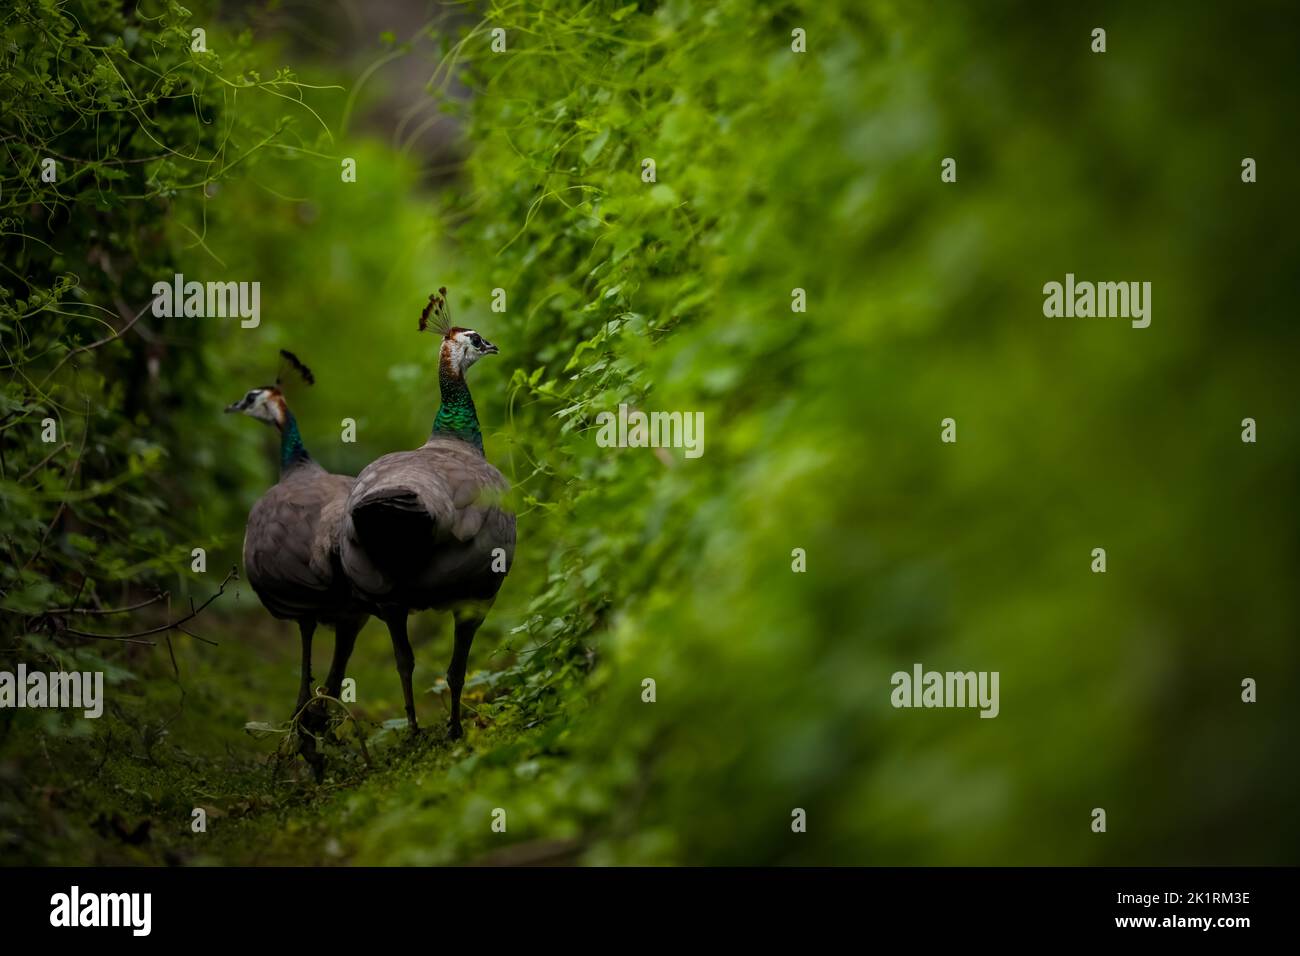 A closeup shot of beautiful peafowls in the green tunnel of plants Stock Photo